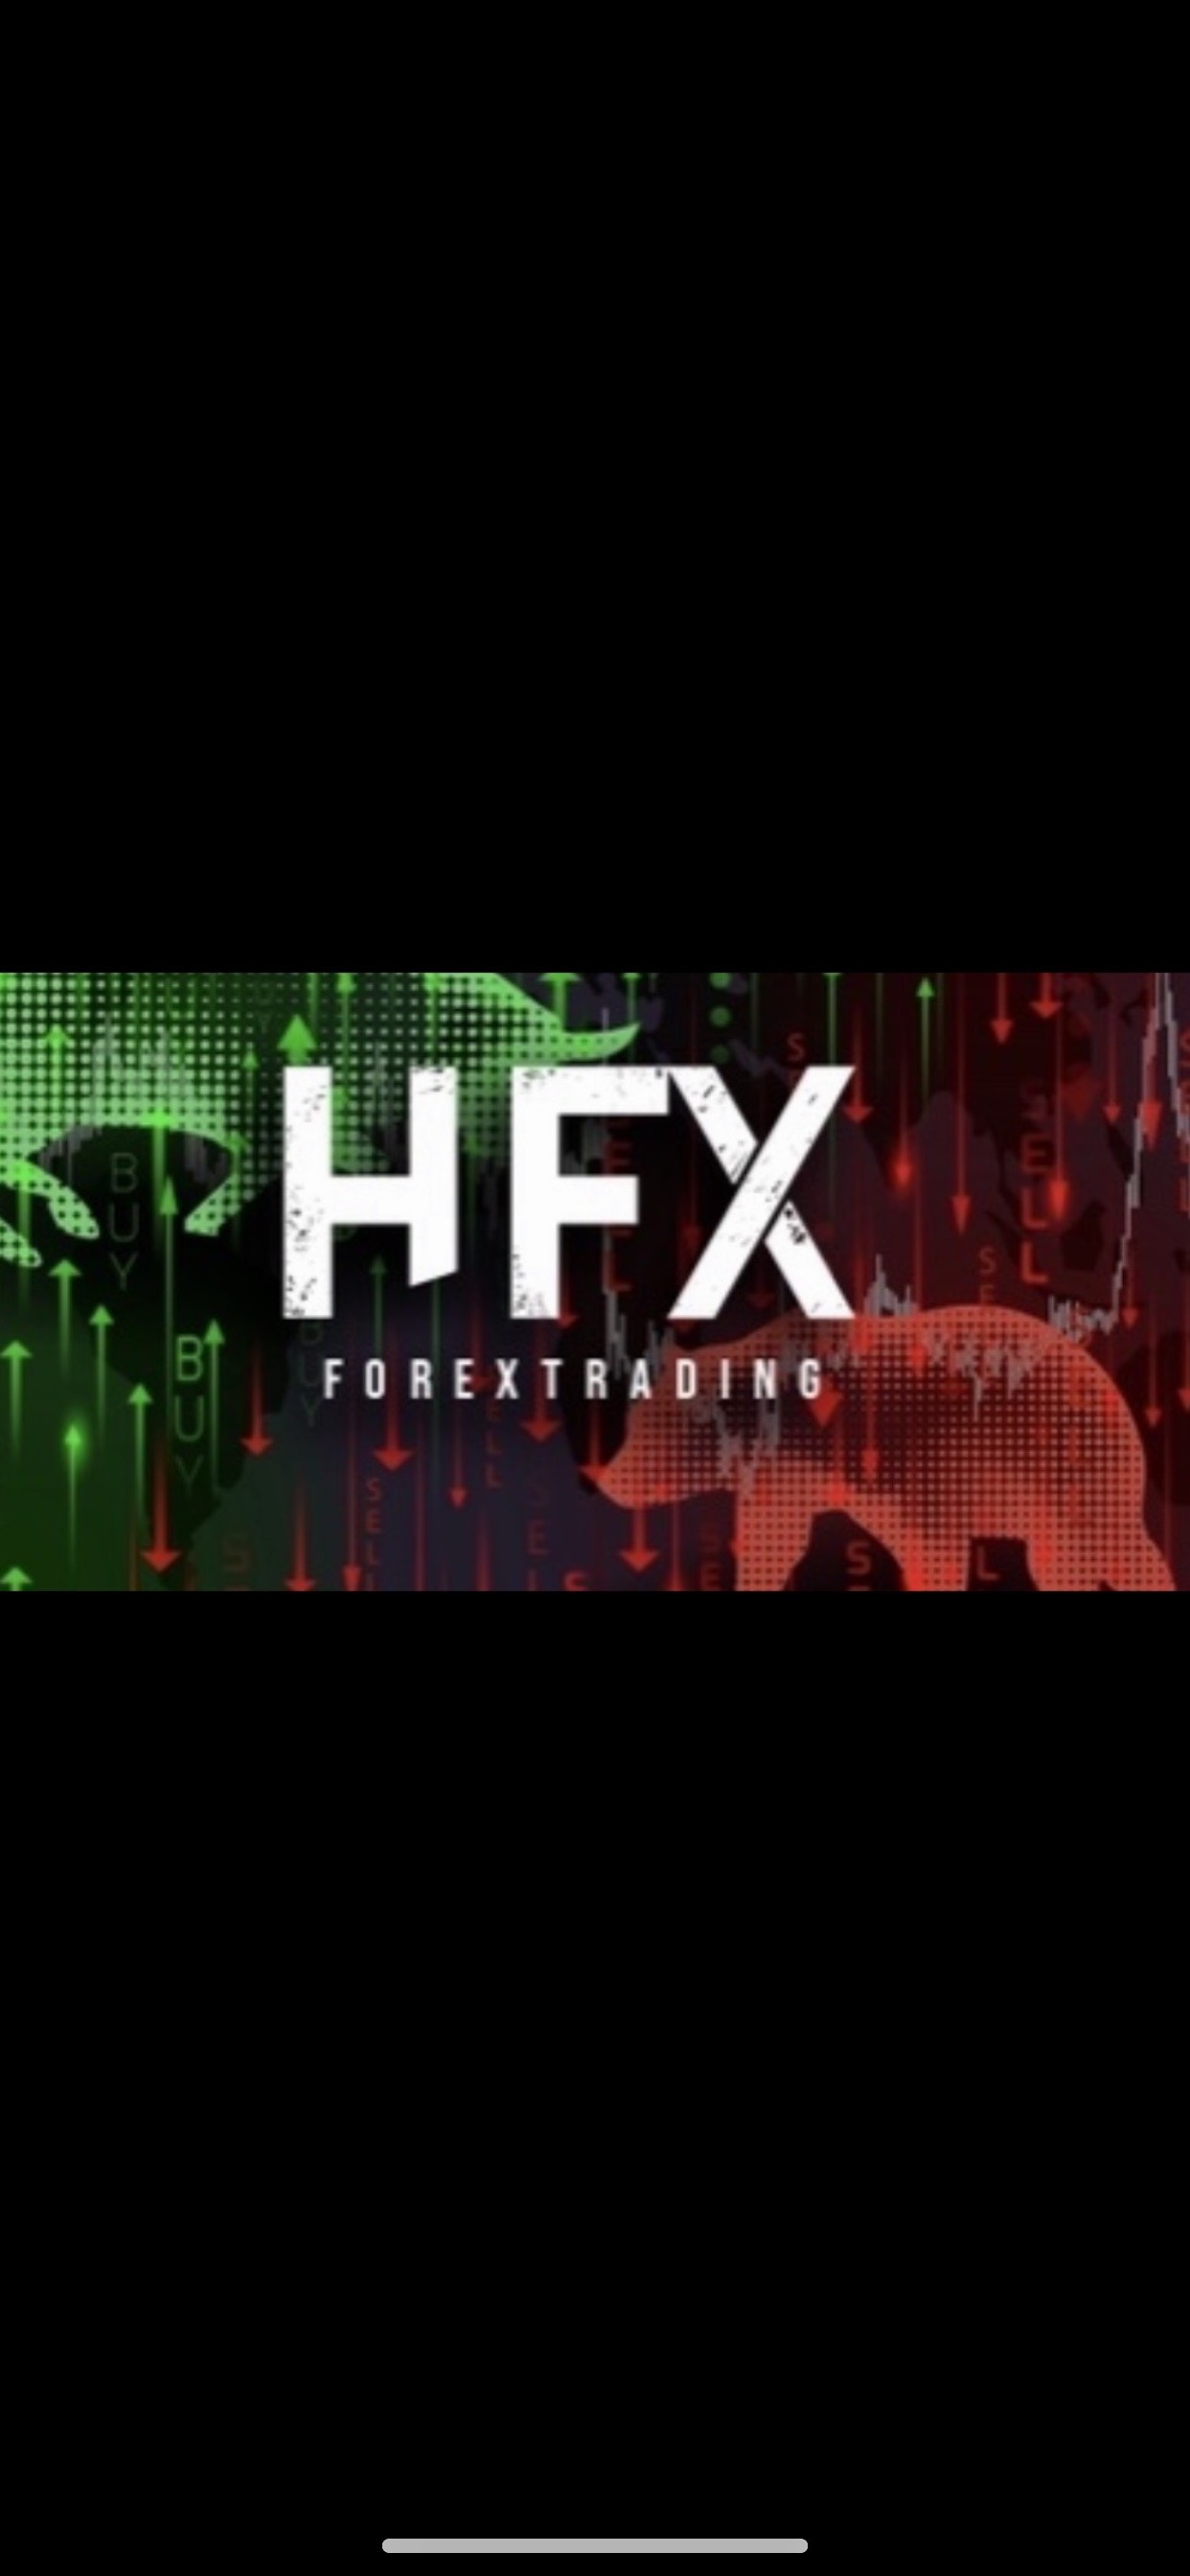 Live hfx trading sessions